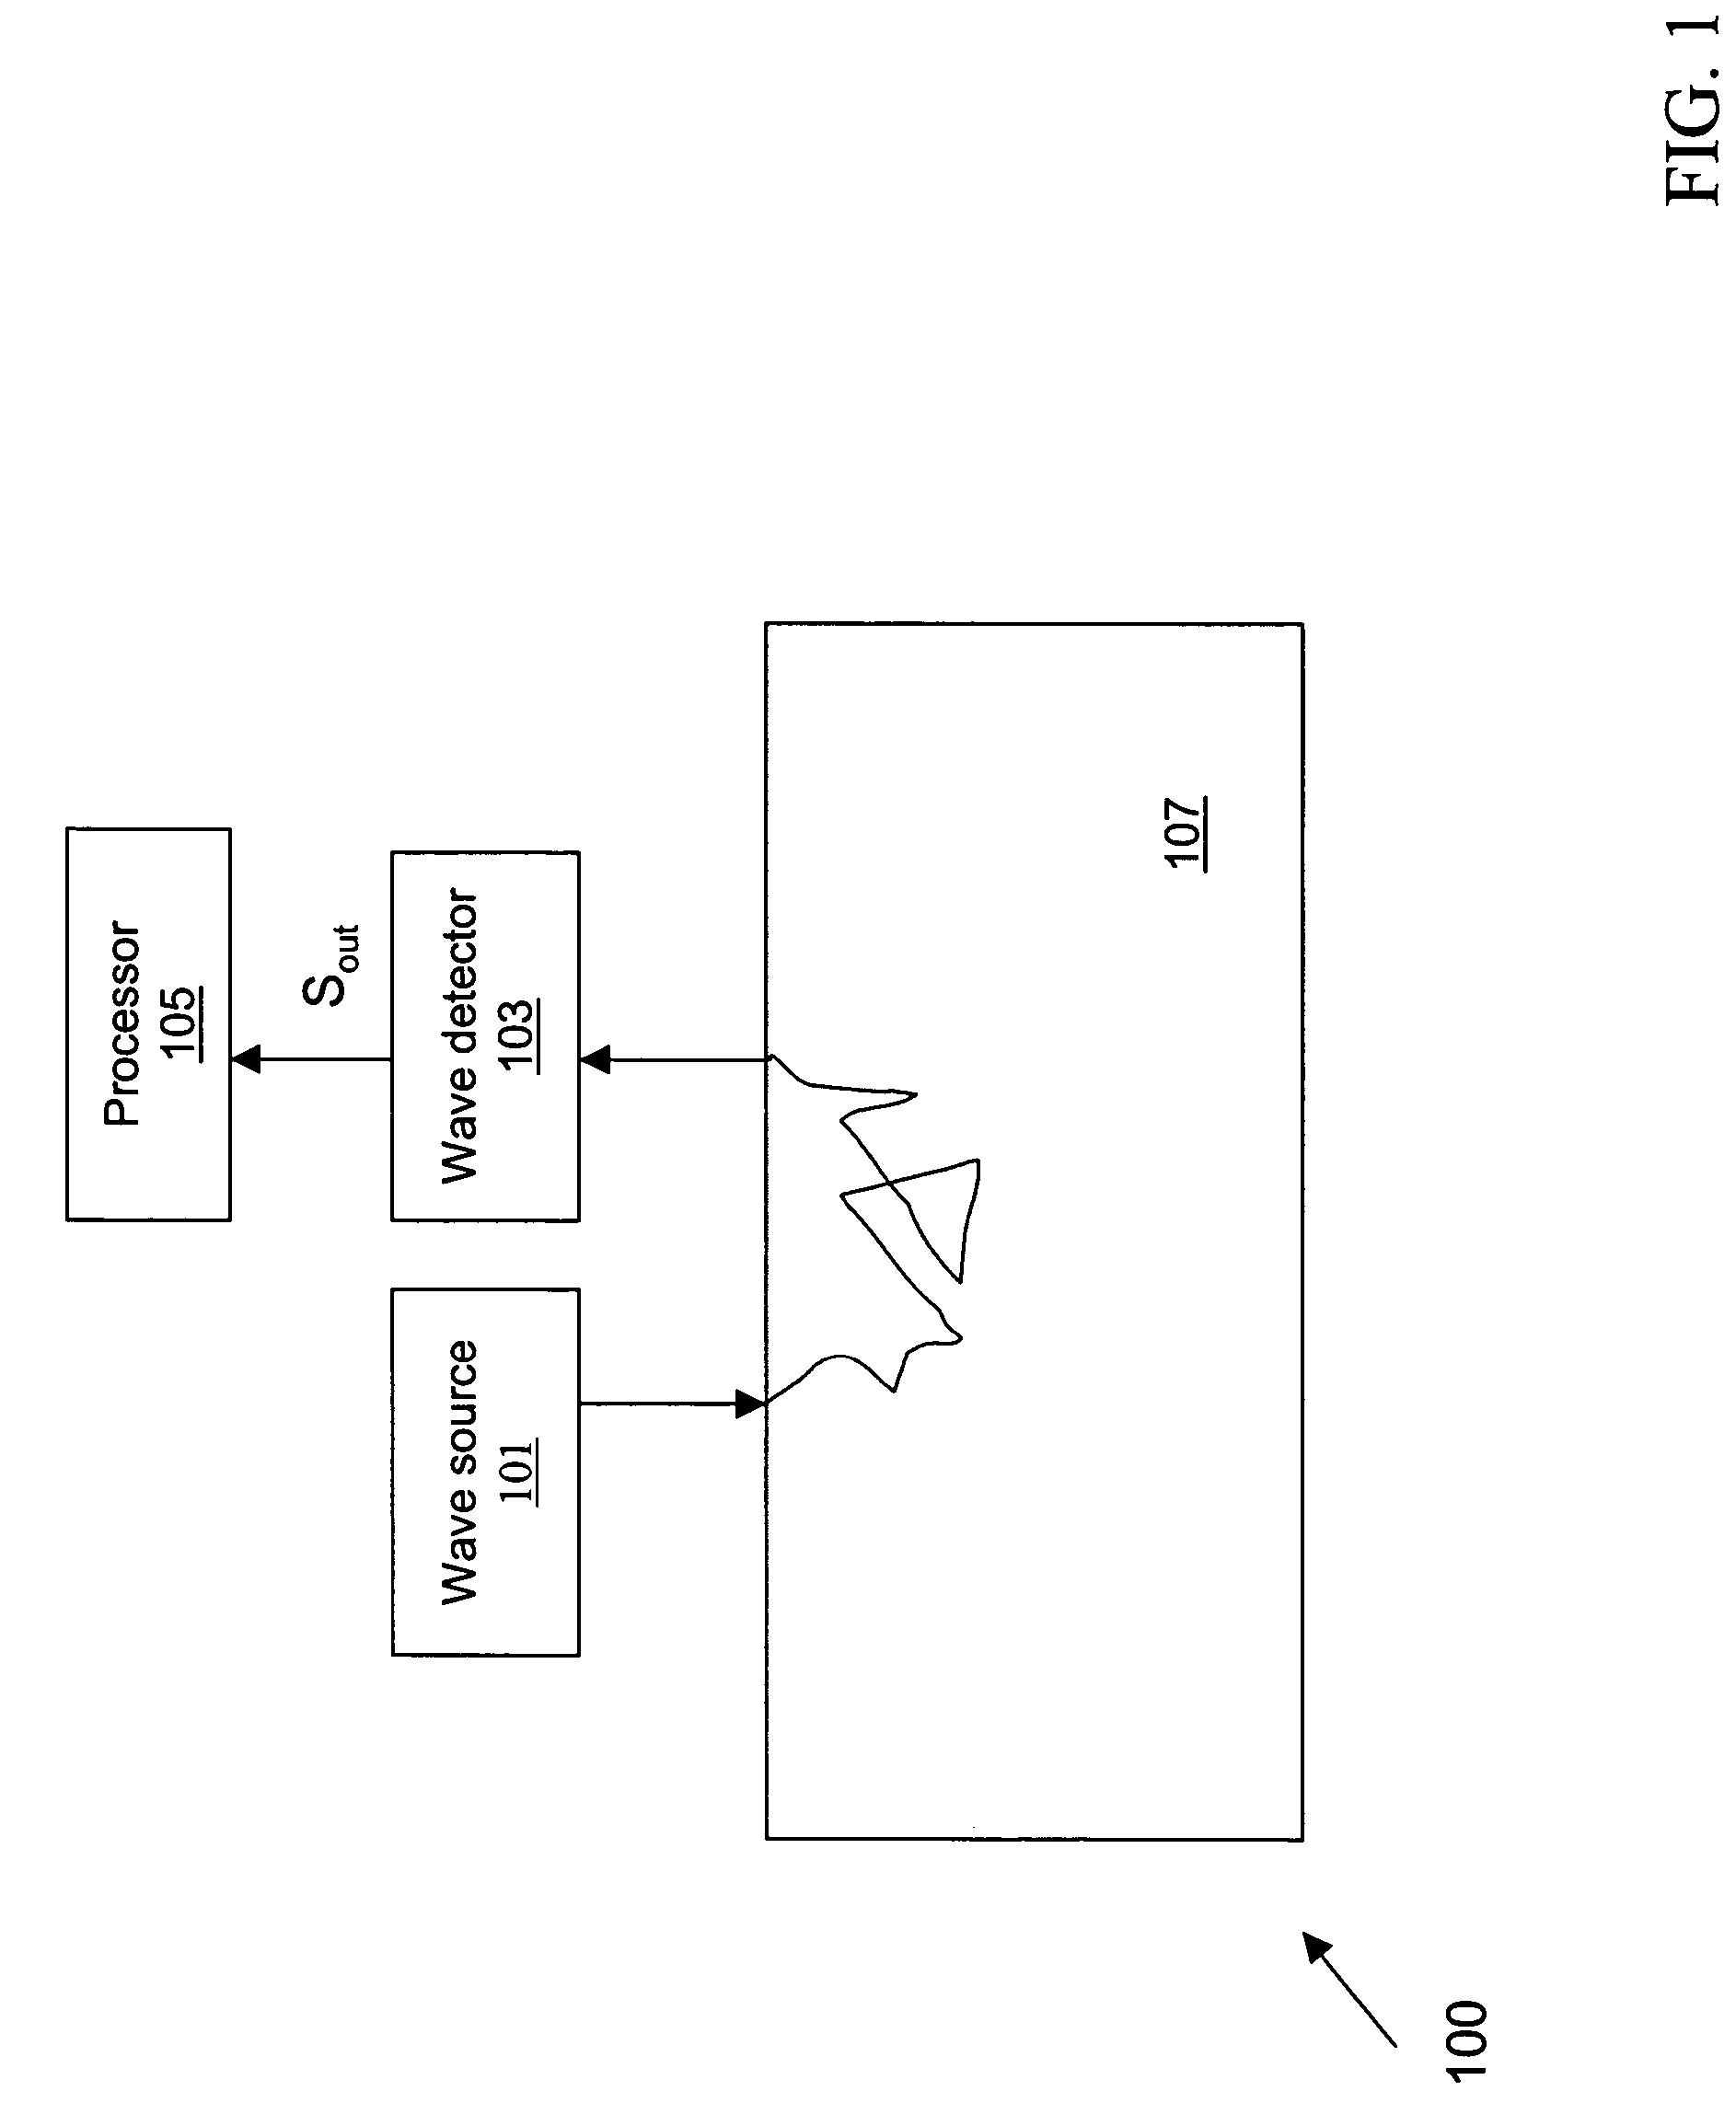 Optical apparatus and method of use for non-invasive tomographic scan of biological tissues